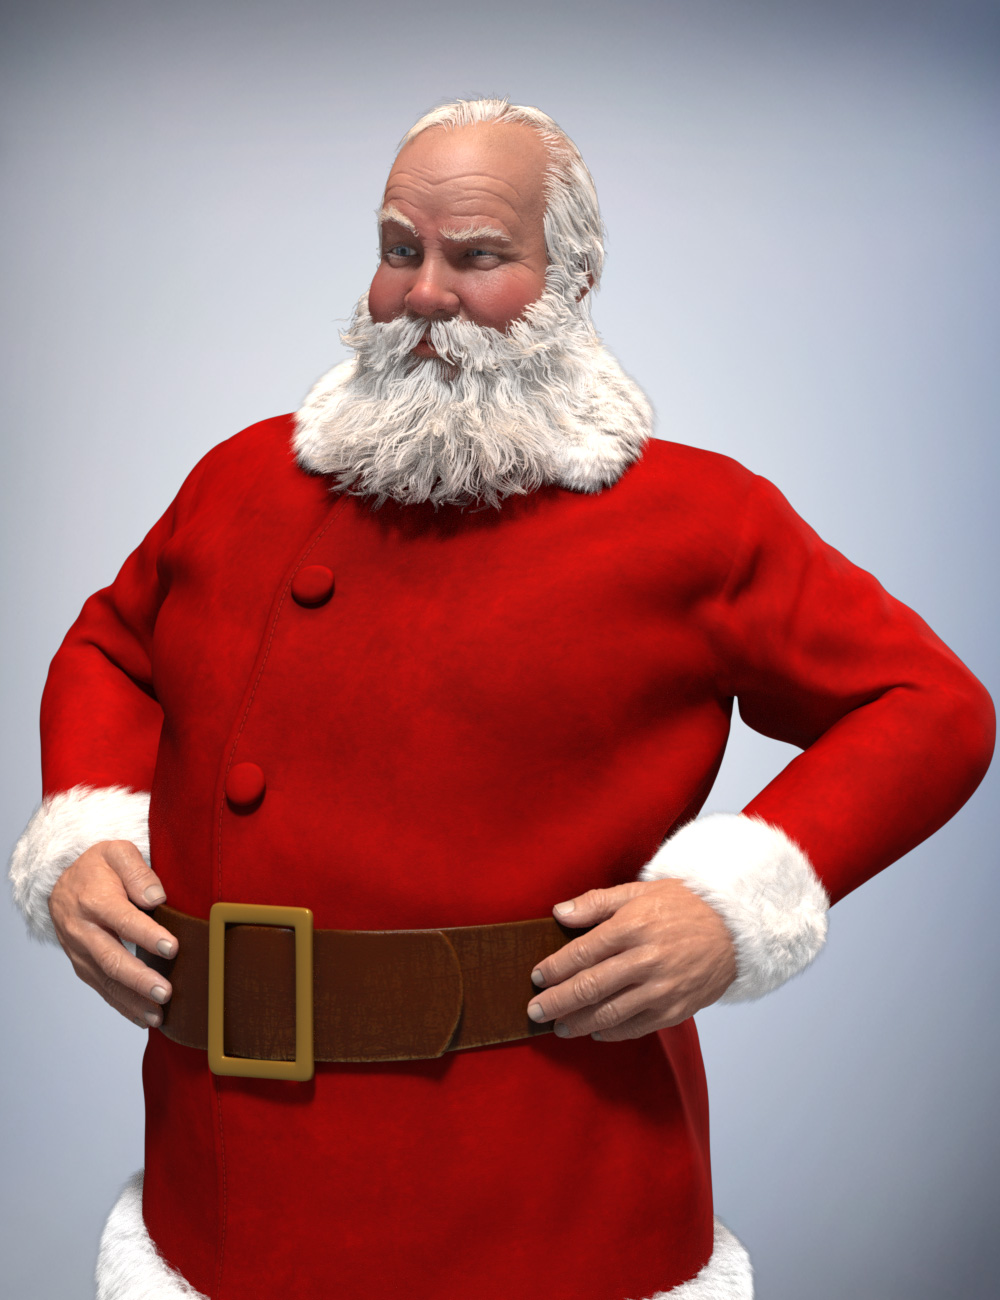 Santa Claus Suit and Character